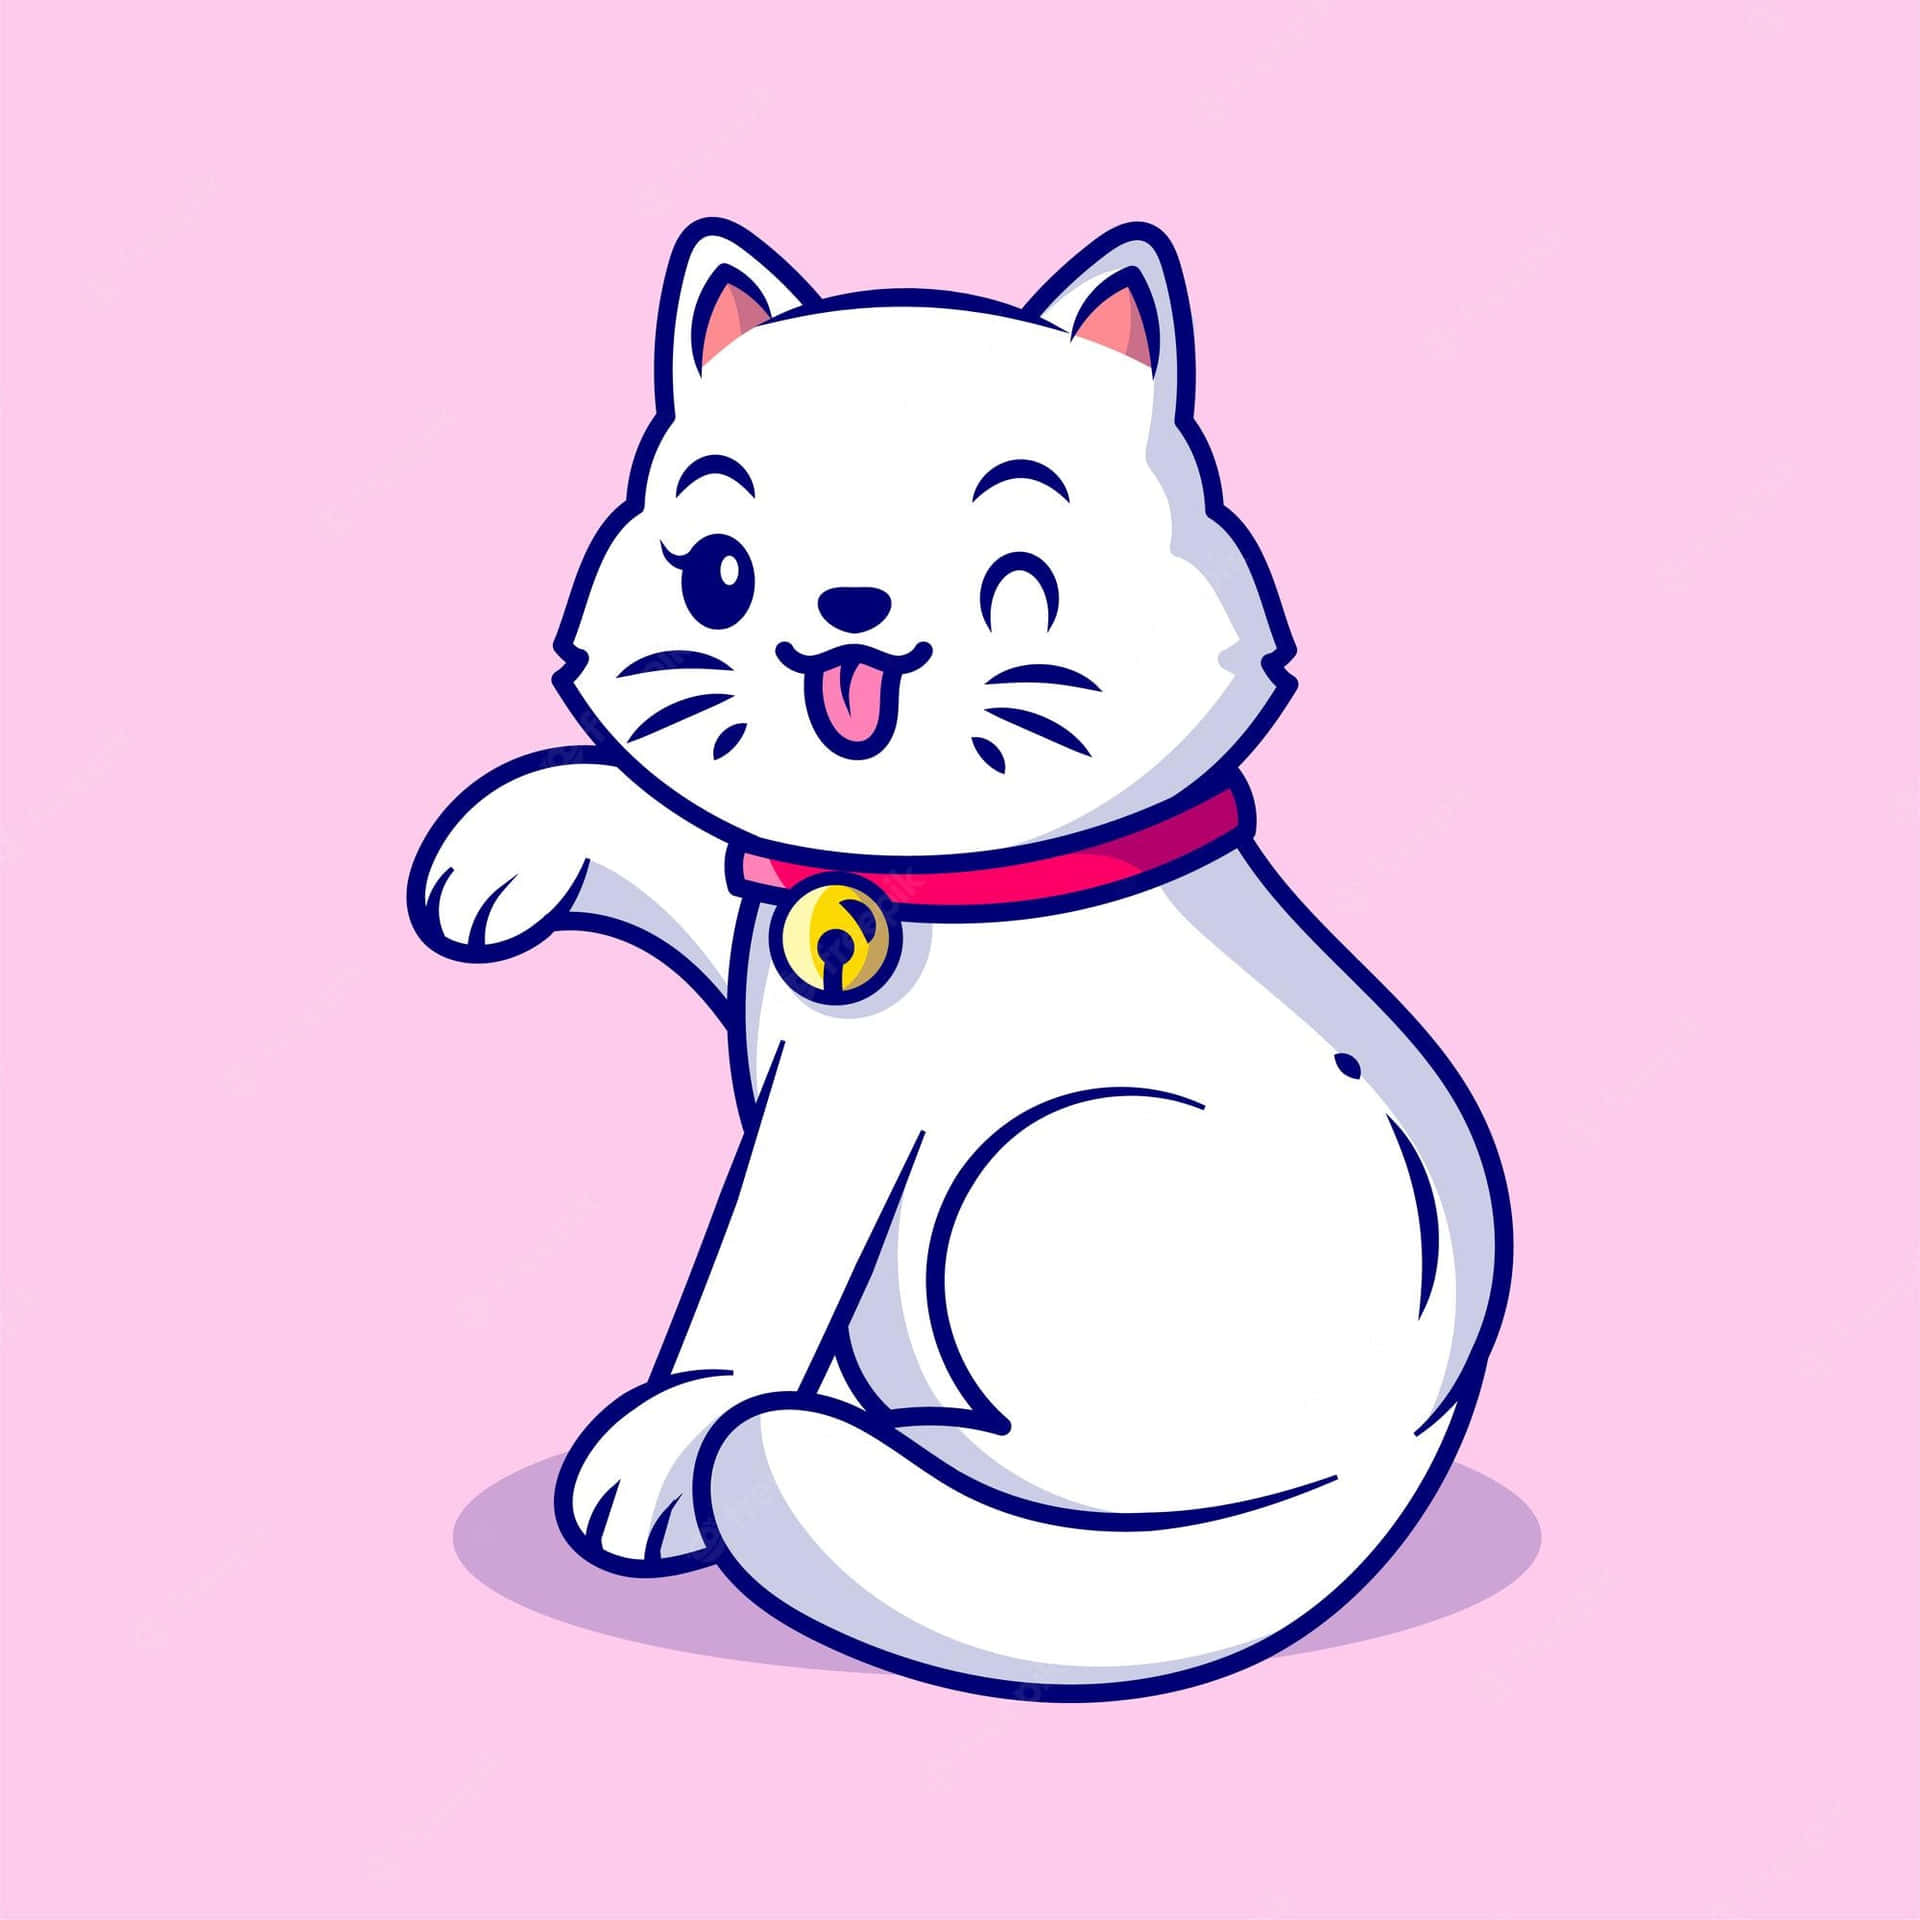 Cartoons can be cute and cool and this is proven by this adorable cartoon cat!